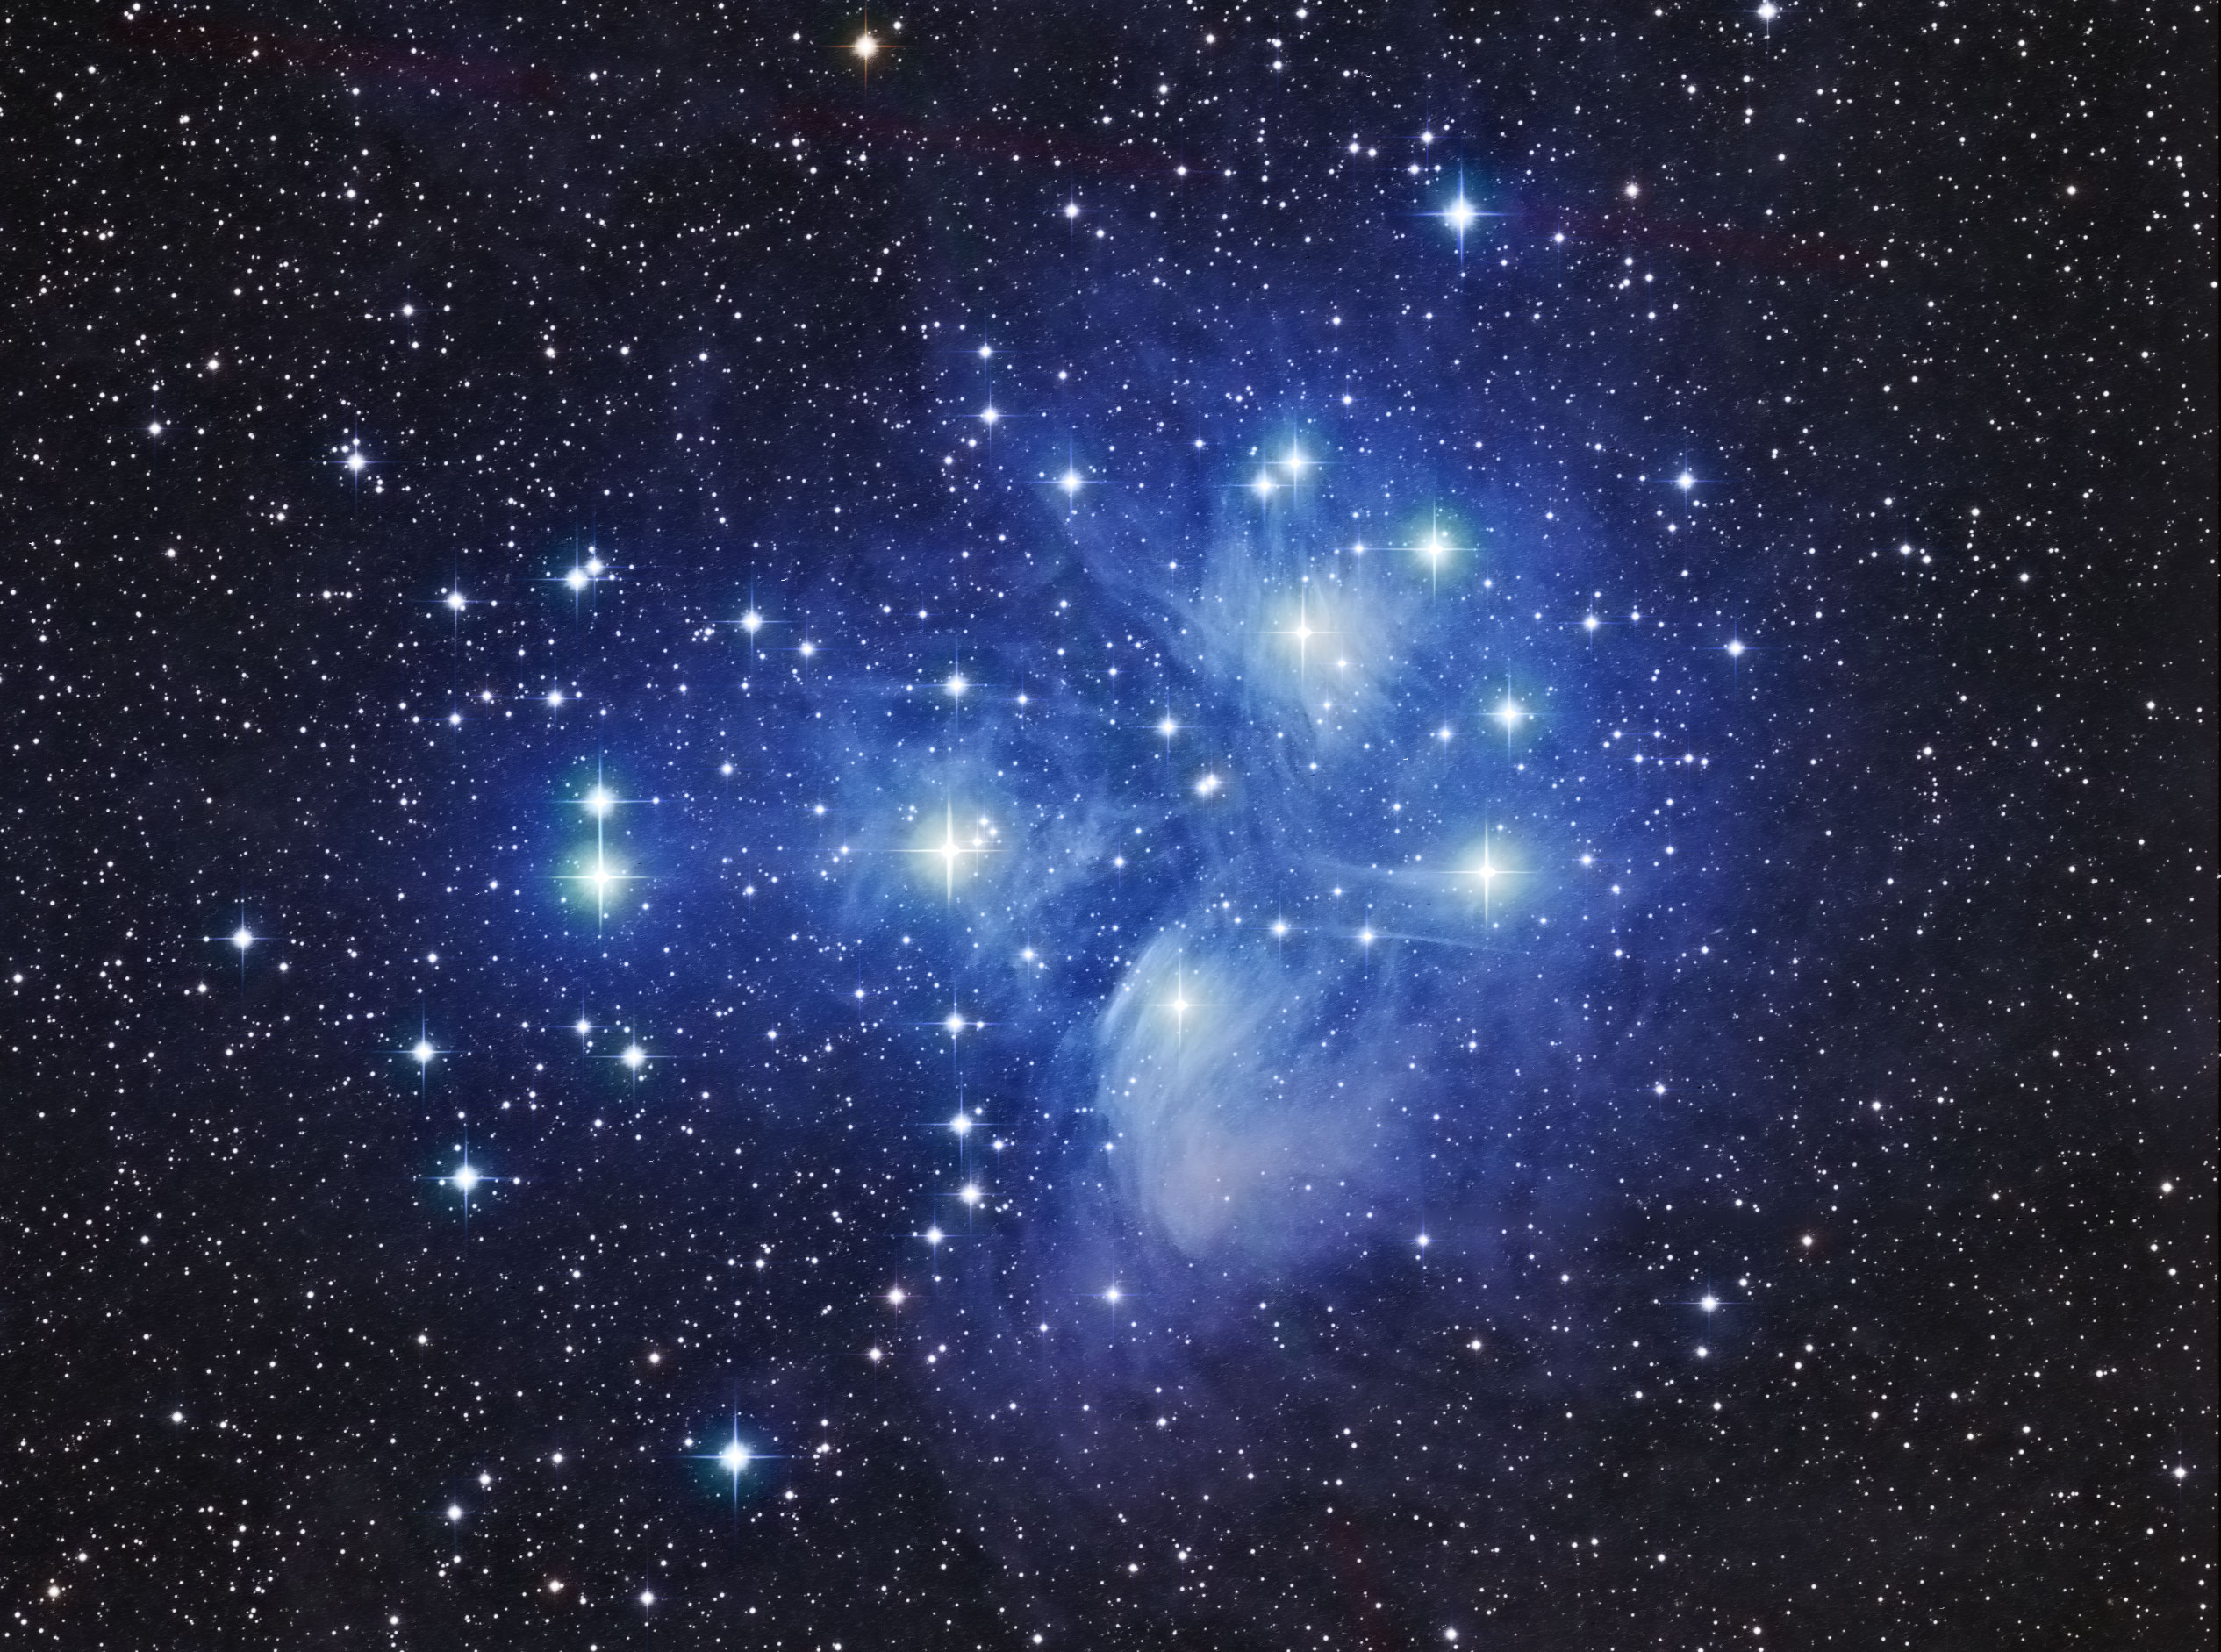 The alt attribute of this image is empty, its file name is m45.jpg.